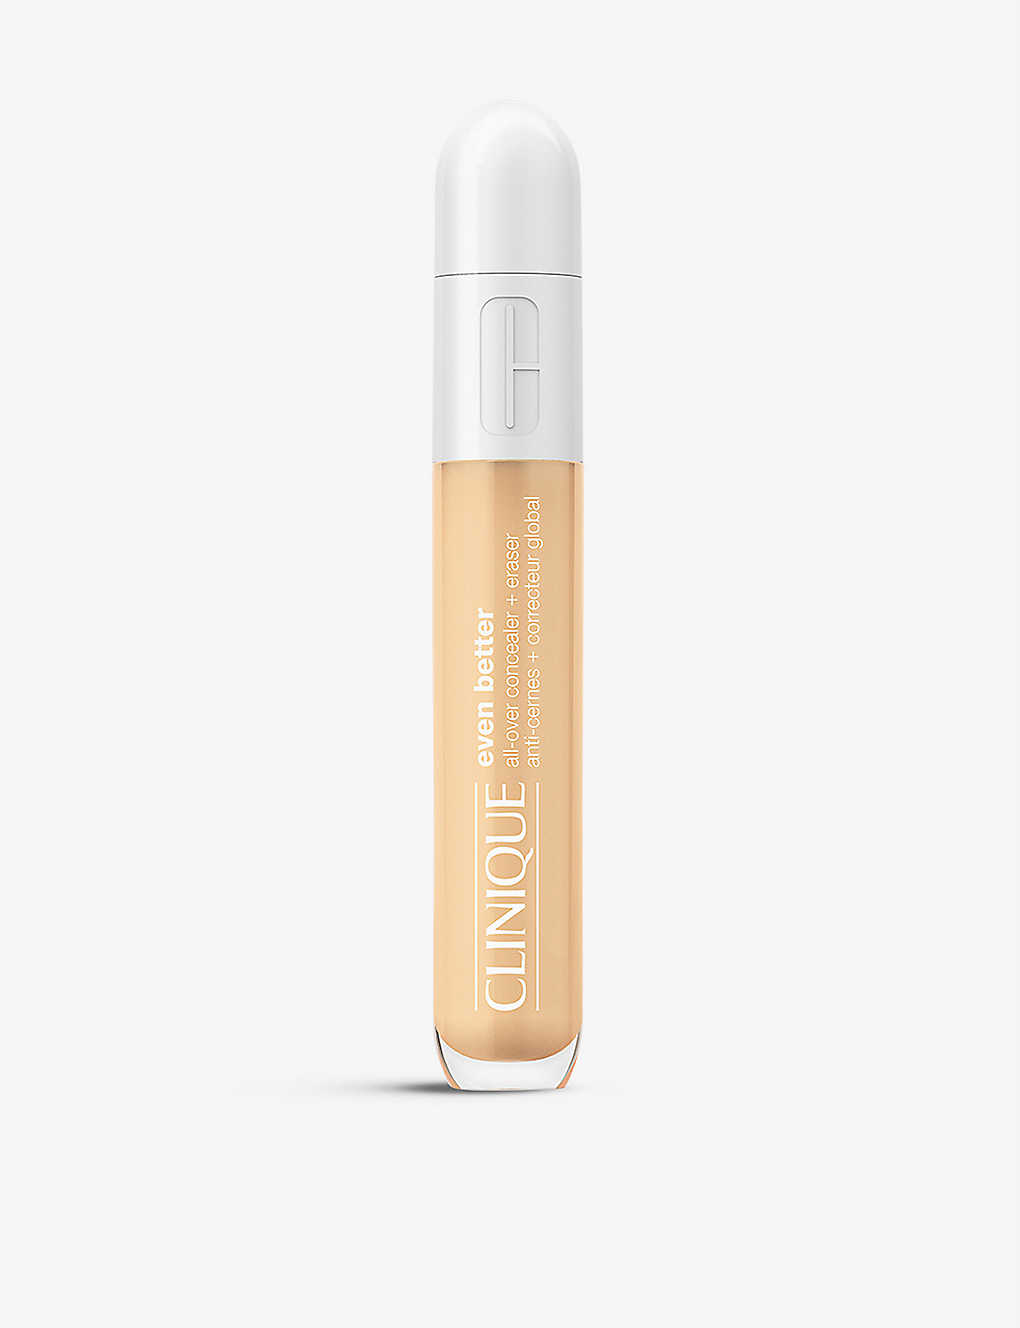 Clinique Even Better All-over Concealer And Eraser 6ml In Cn 08 Linen